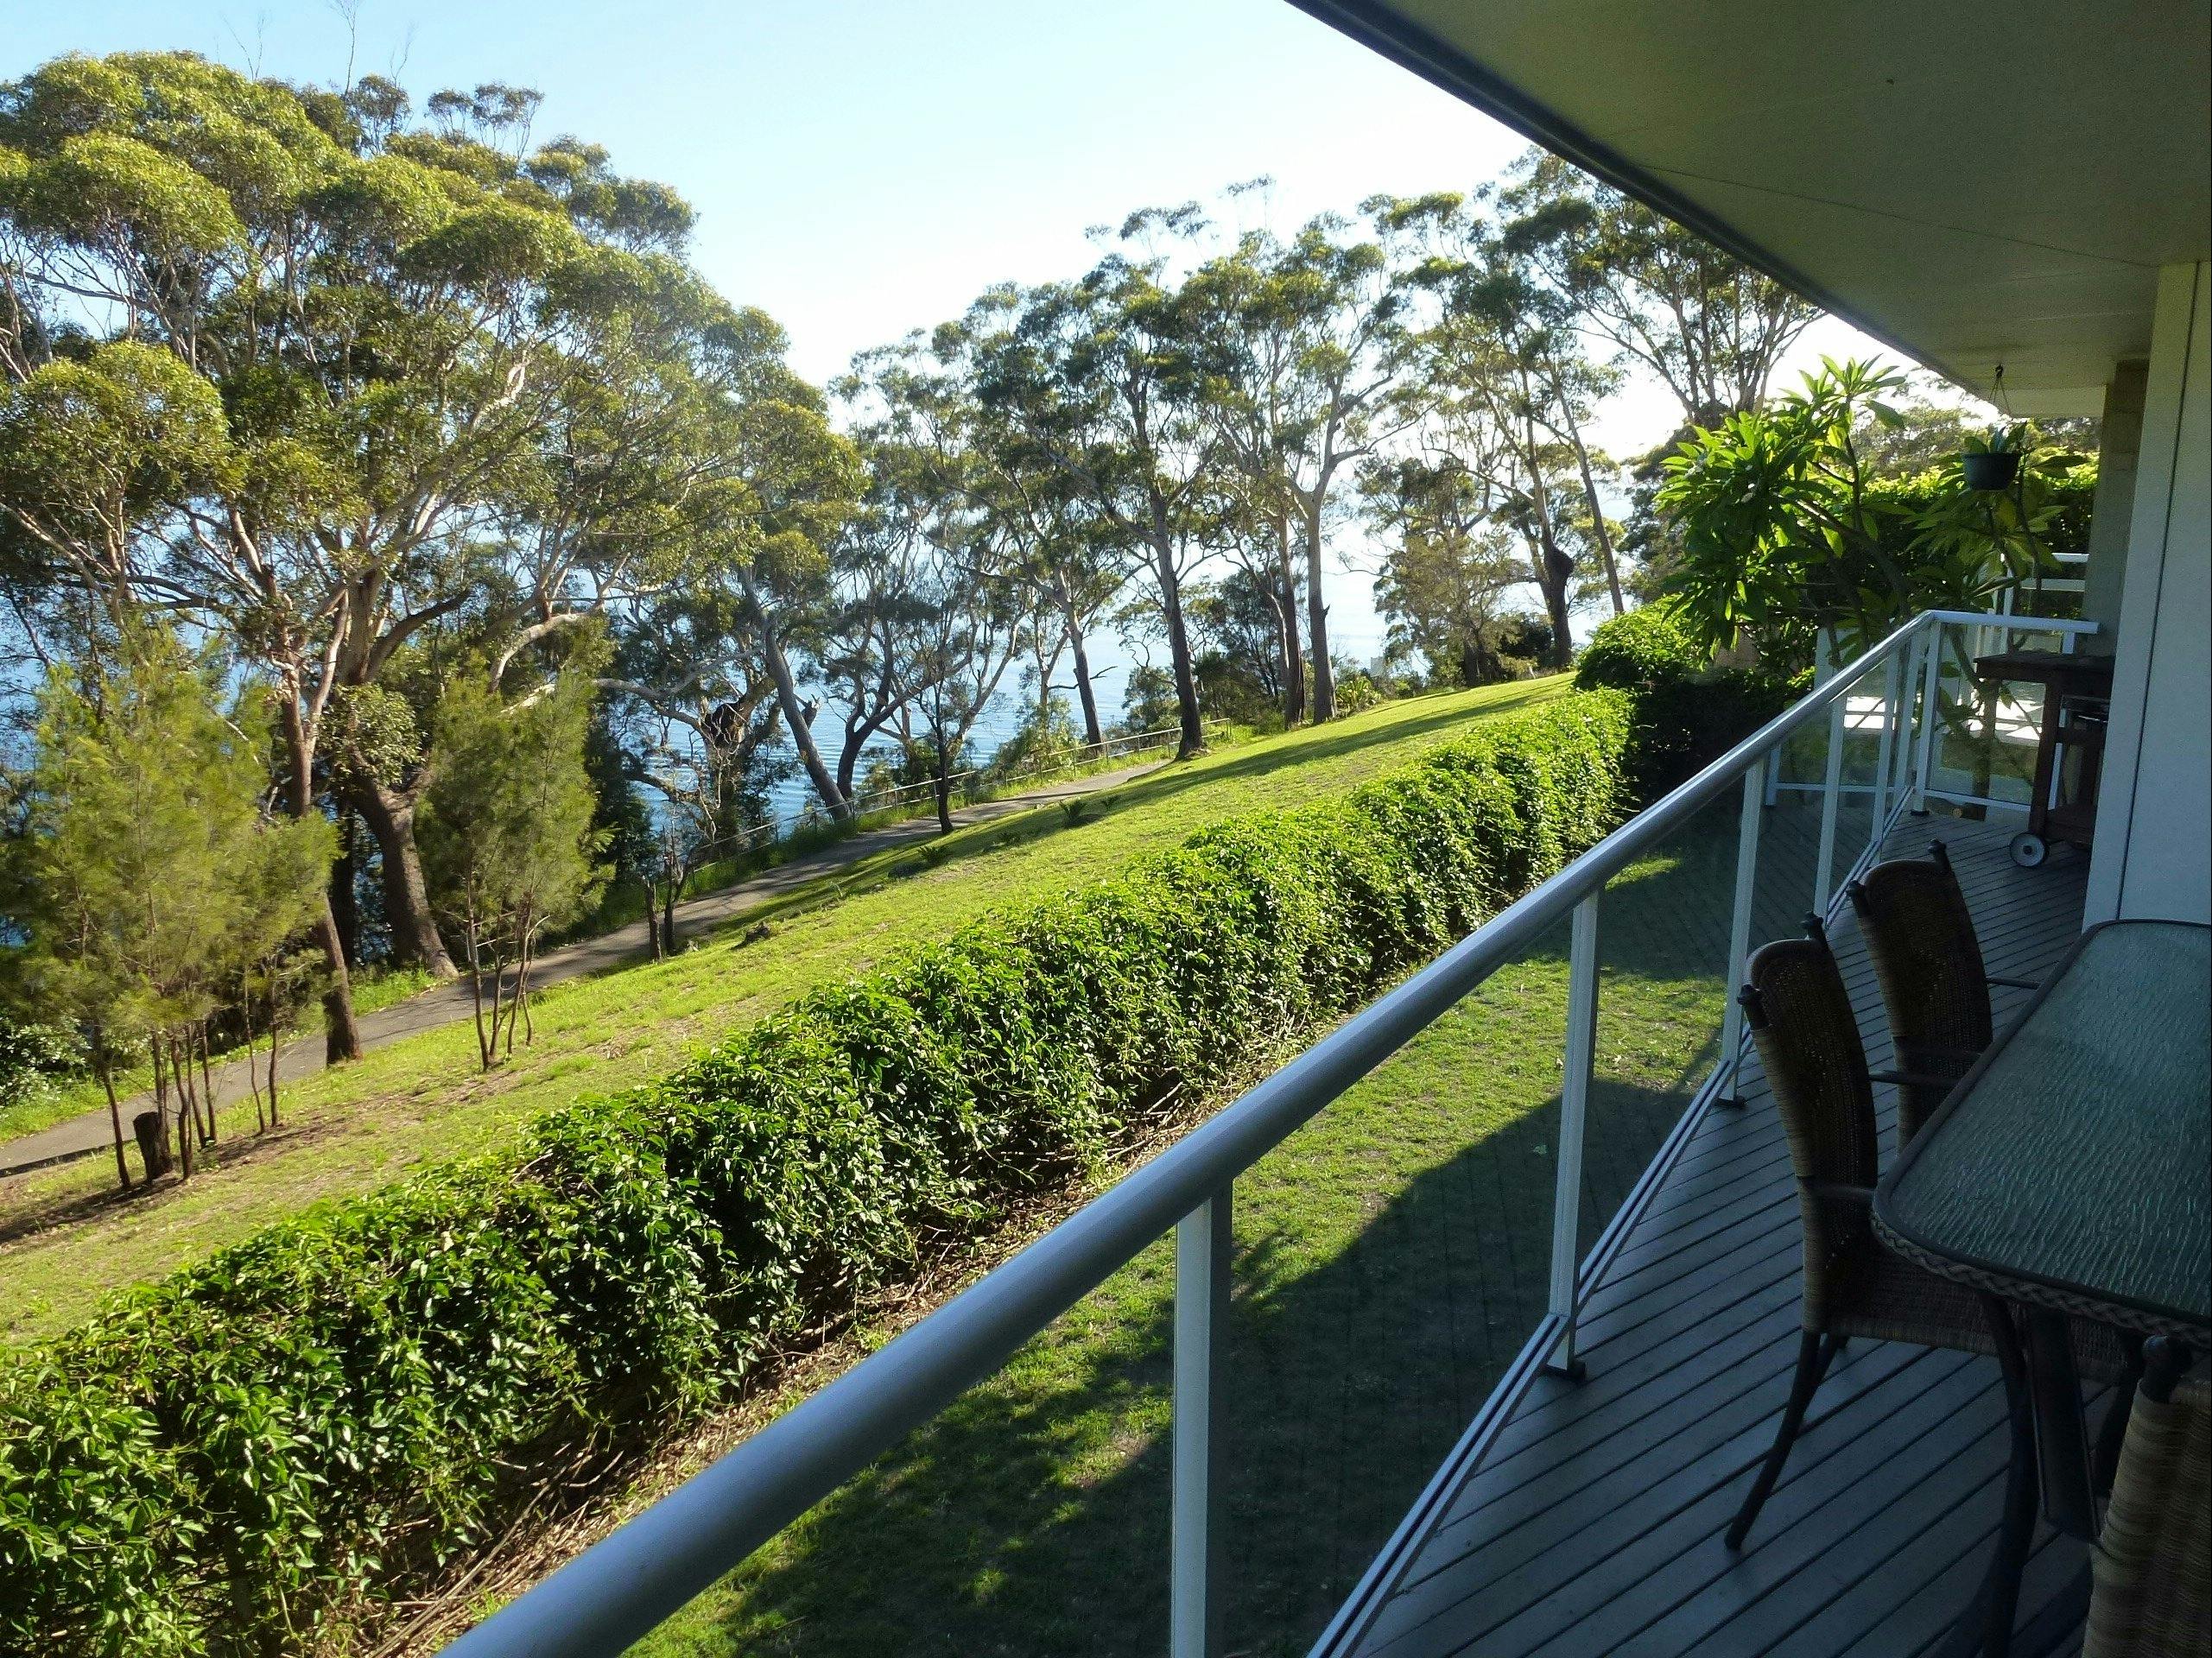 Ripple Cove | NSW Holidays & Accommodation, Things to Do ...